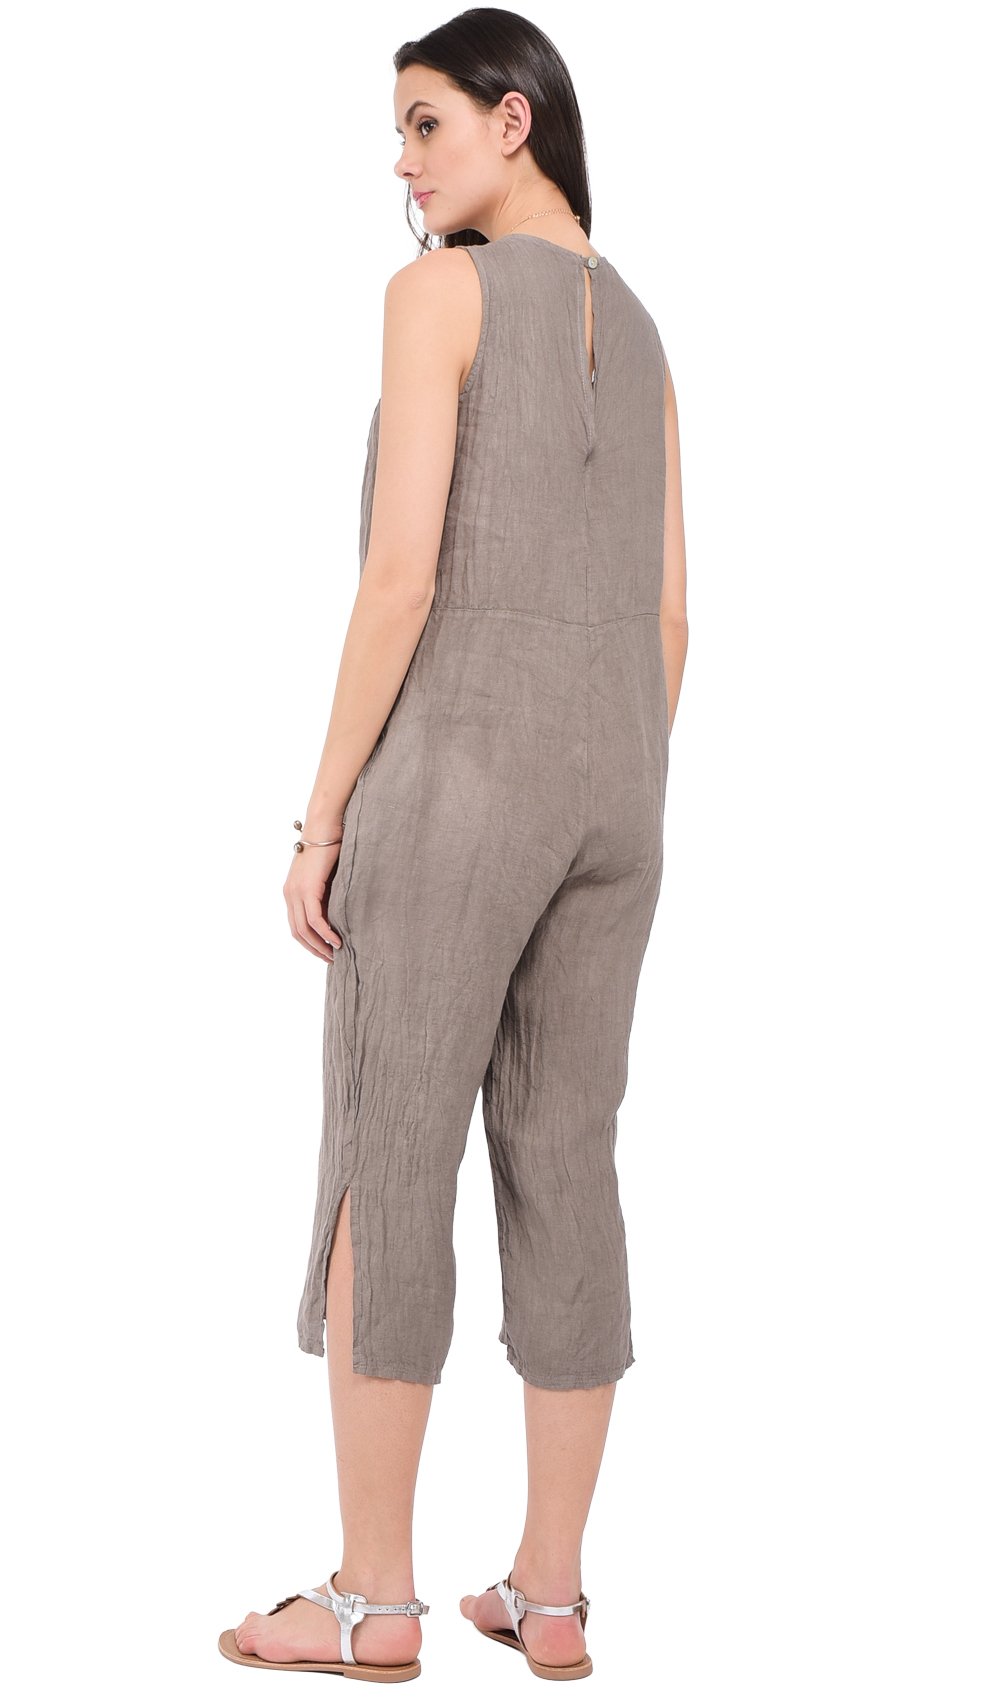 ROUND WATER DROP COLLAR JUMPSUIT WITH POCKETS AND LATERAL LEGS OPENING